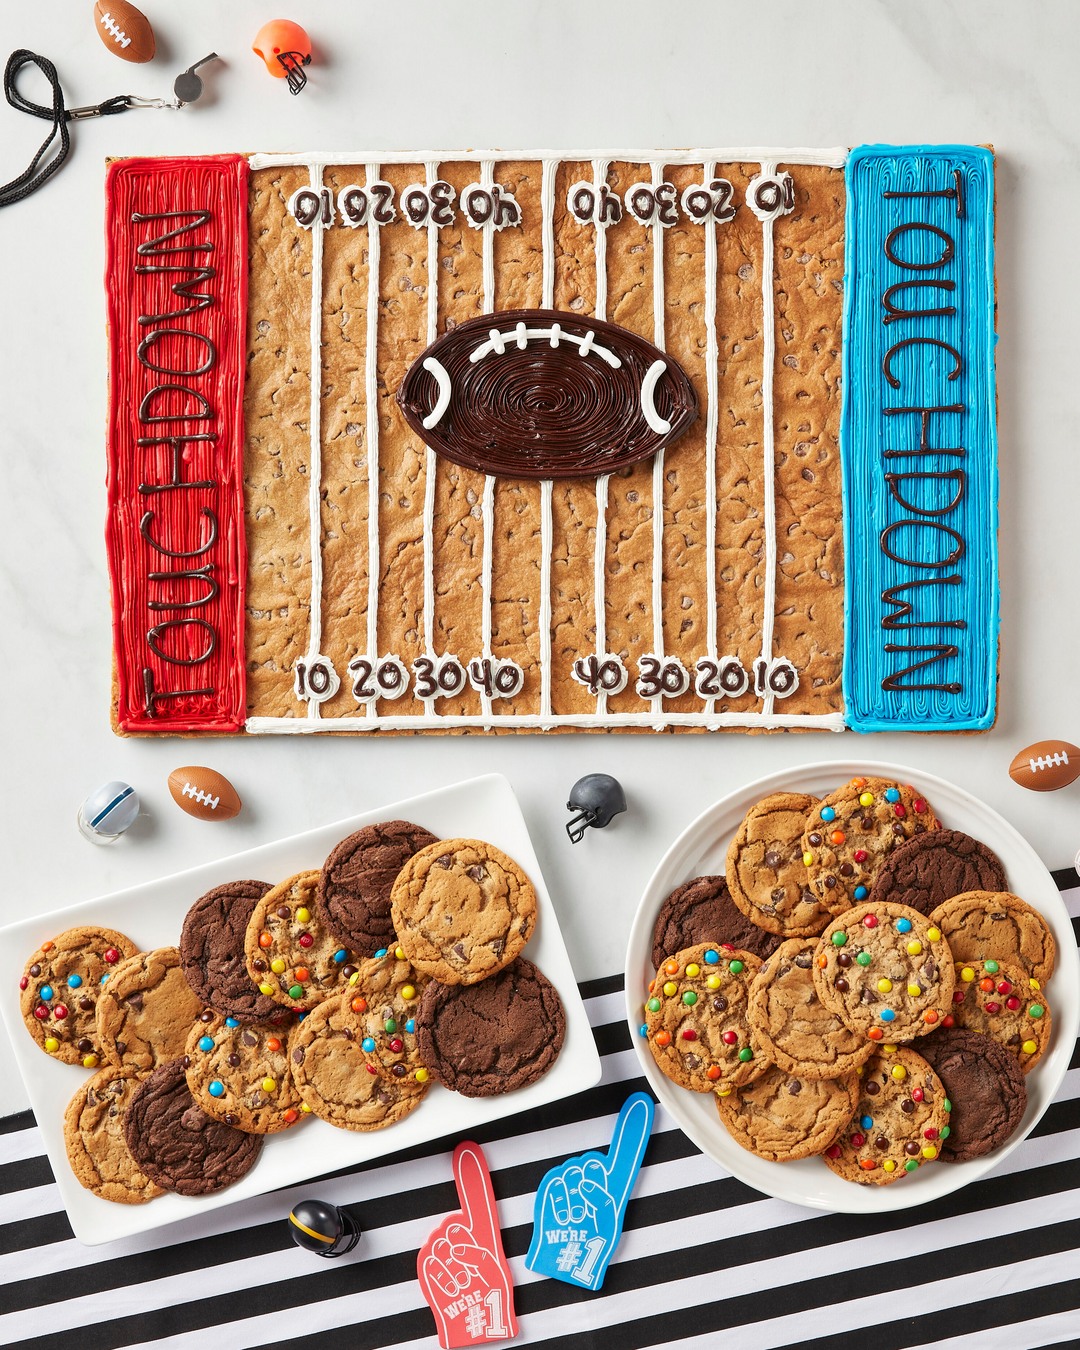 Game Day Cookies at Great American Cookie Company from Great American Cookie Co.